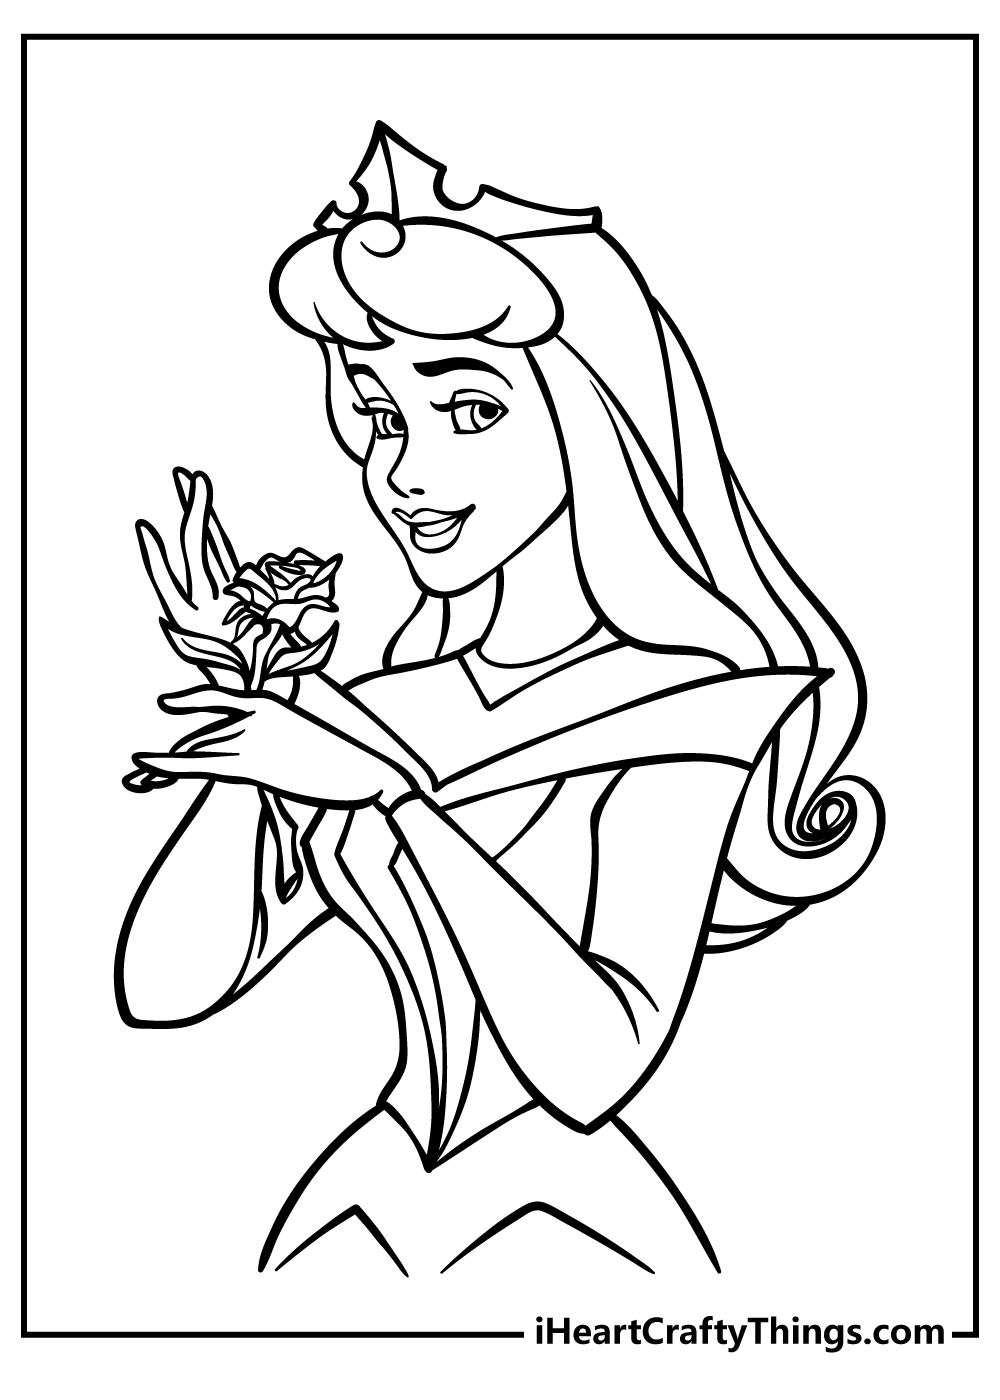 Sleeping Beauty Coloring Pages for kids free download